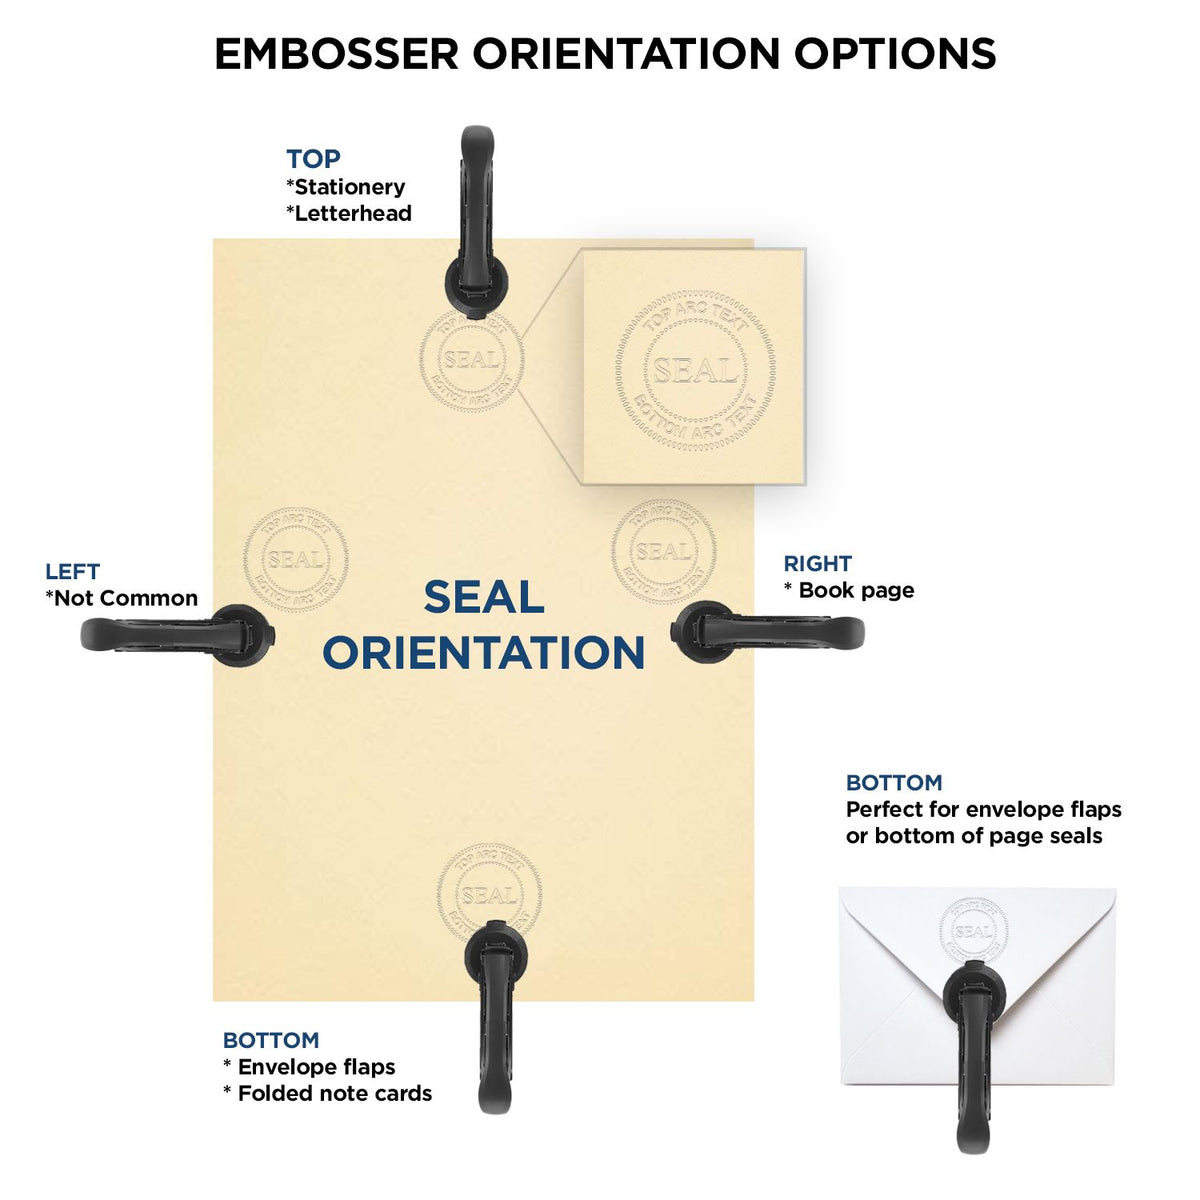 An infographic for the Handheld West Virginia Architect Seal Embosser showing embosser orientation, this is showing examples of a top, bottom, right and left insert.